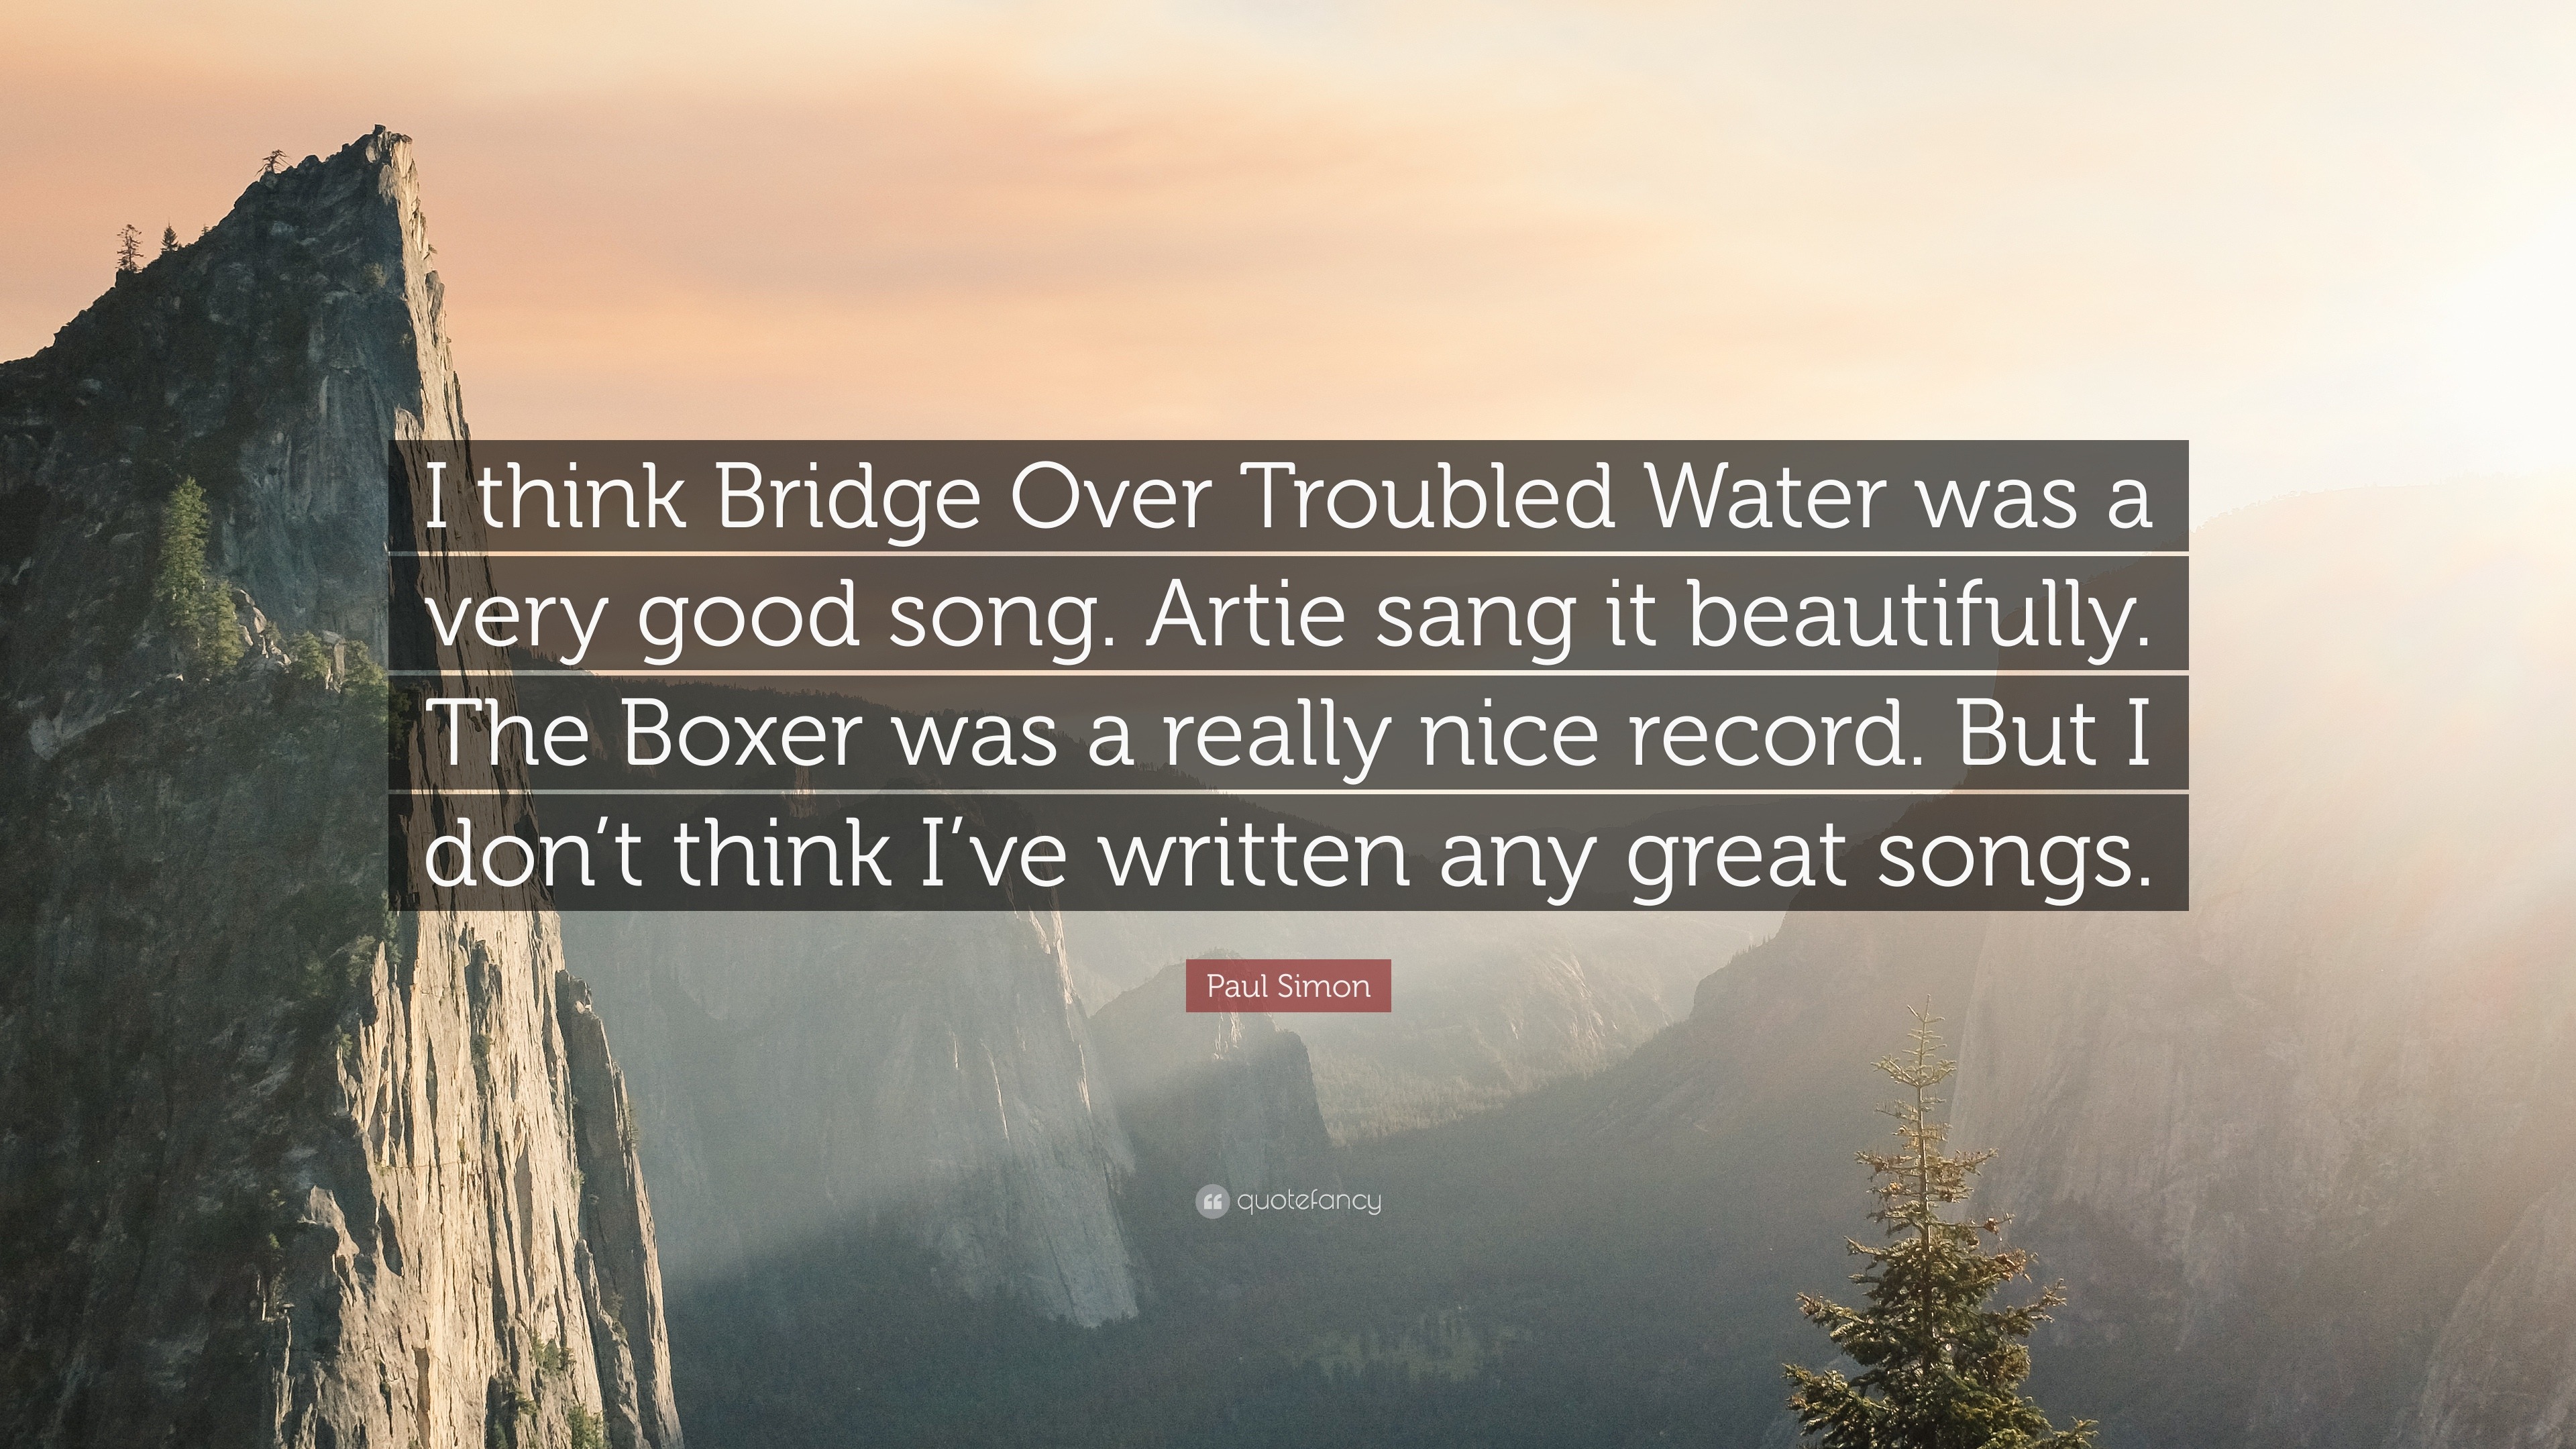 Paul Simon Quote: “I think Bridge Over Troubled Water was a very good song. Artie  sang it beautifully. The Boxer was a really nice record. ”